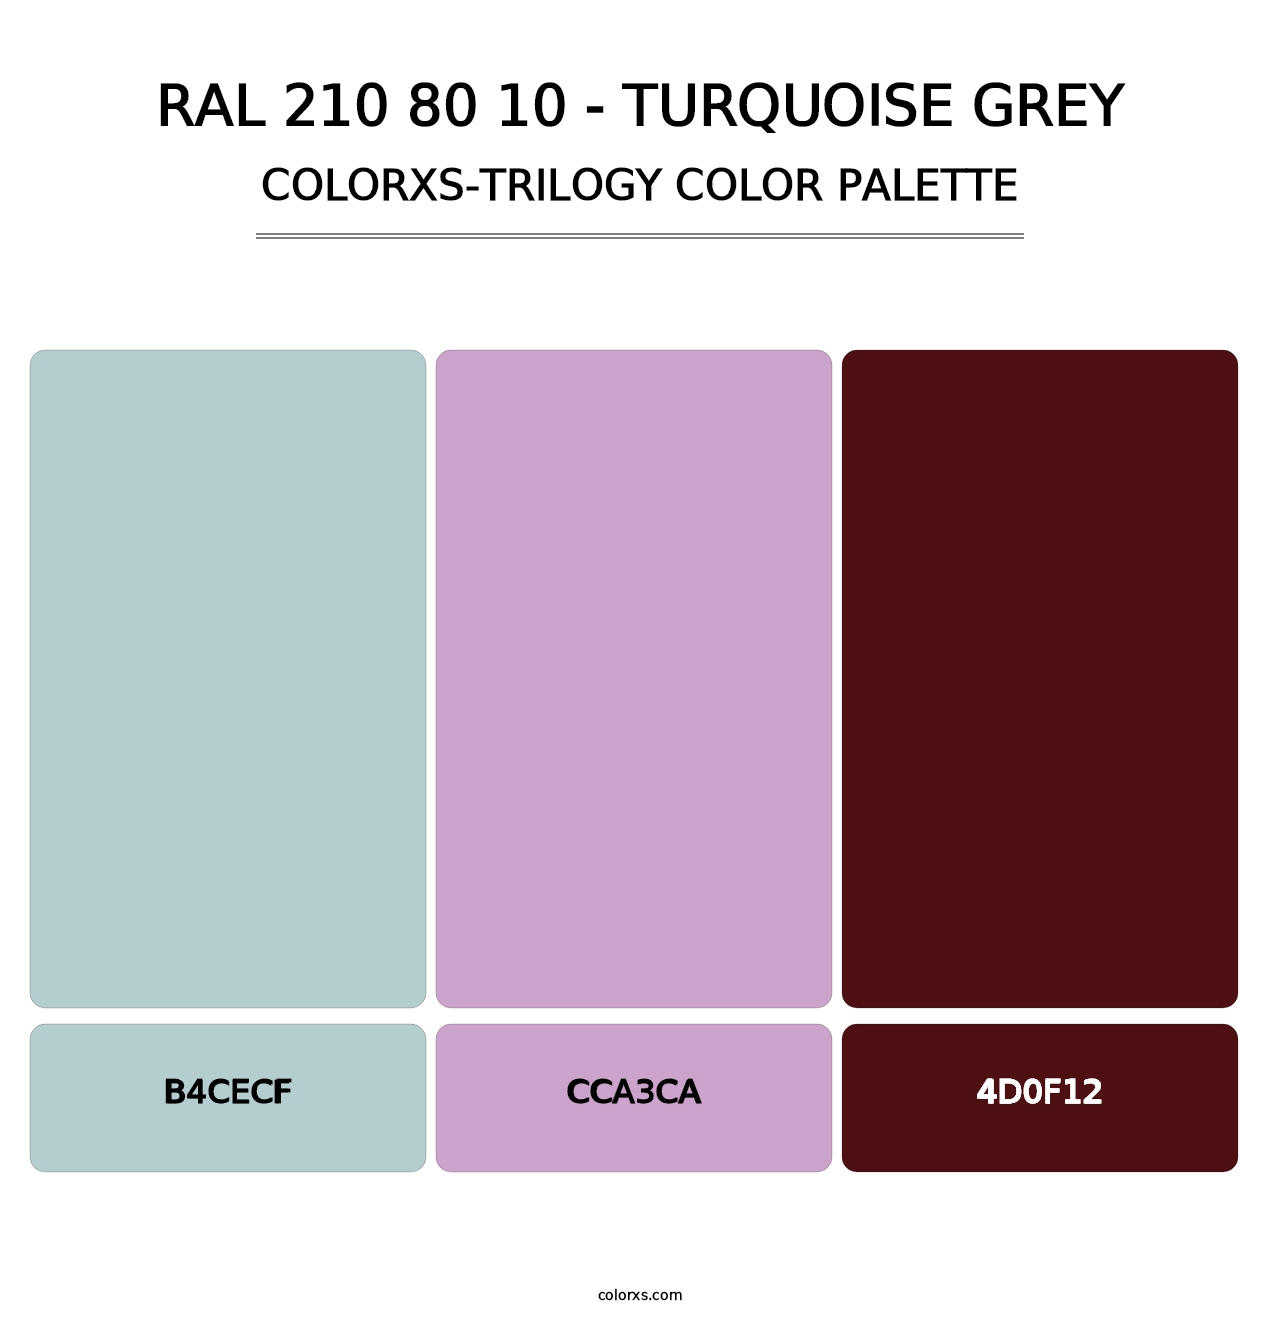 RAL 210 80 10 - Turquoise Grey - Colorxs Trilogy Palette